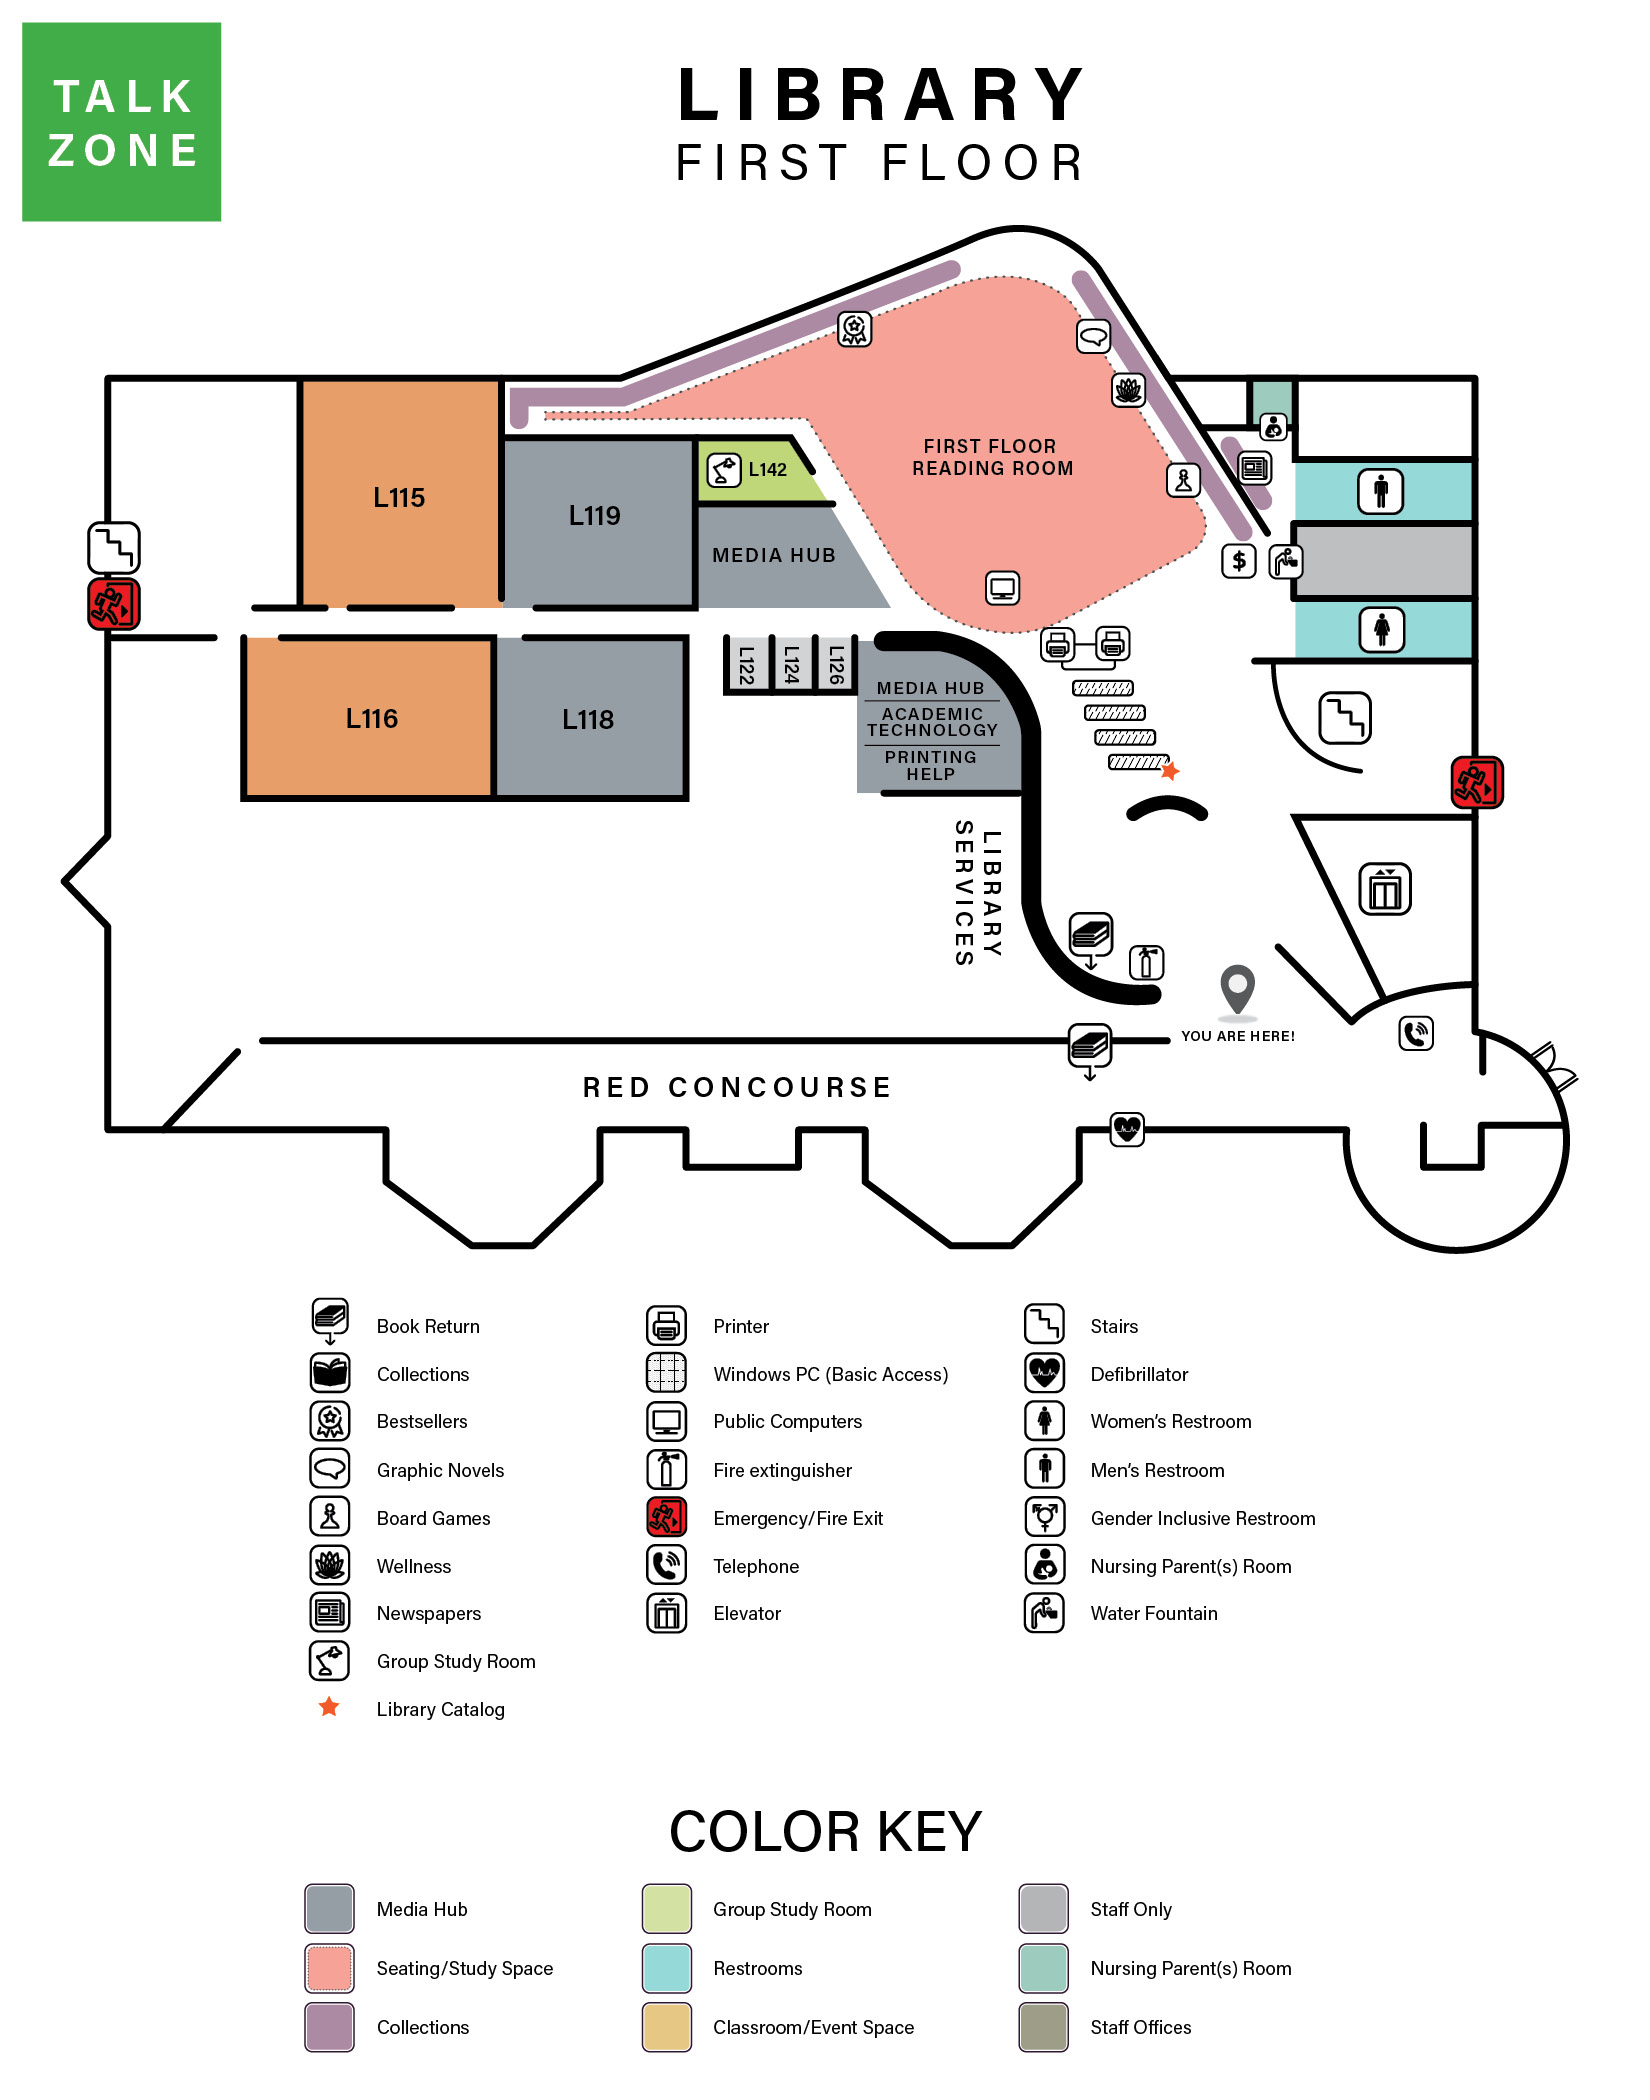 map of library first floor which includes descriptions of spaces and colored areas indicating types of spaces